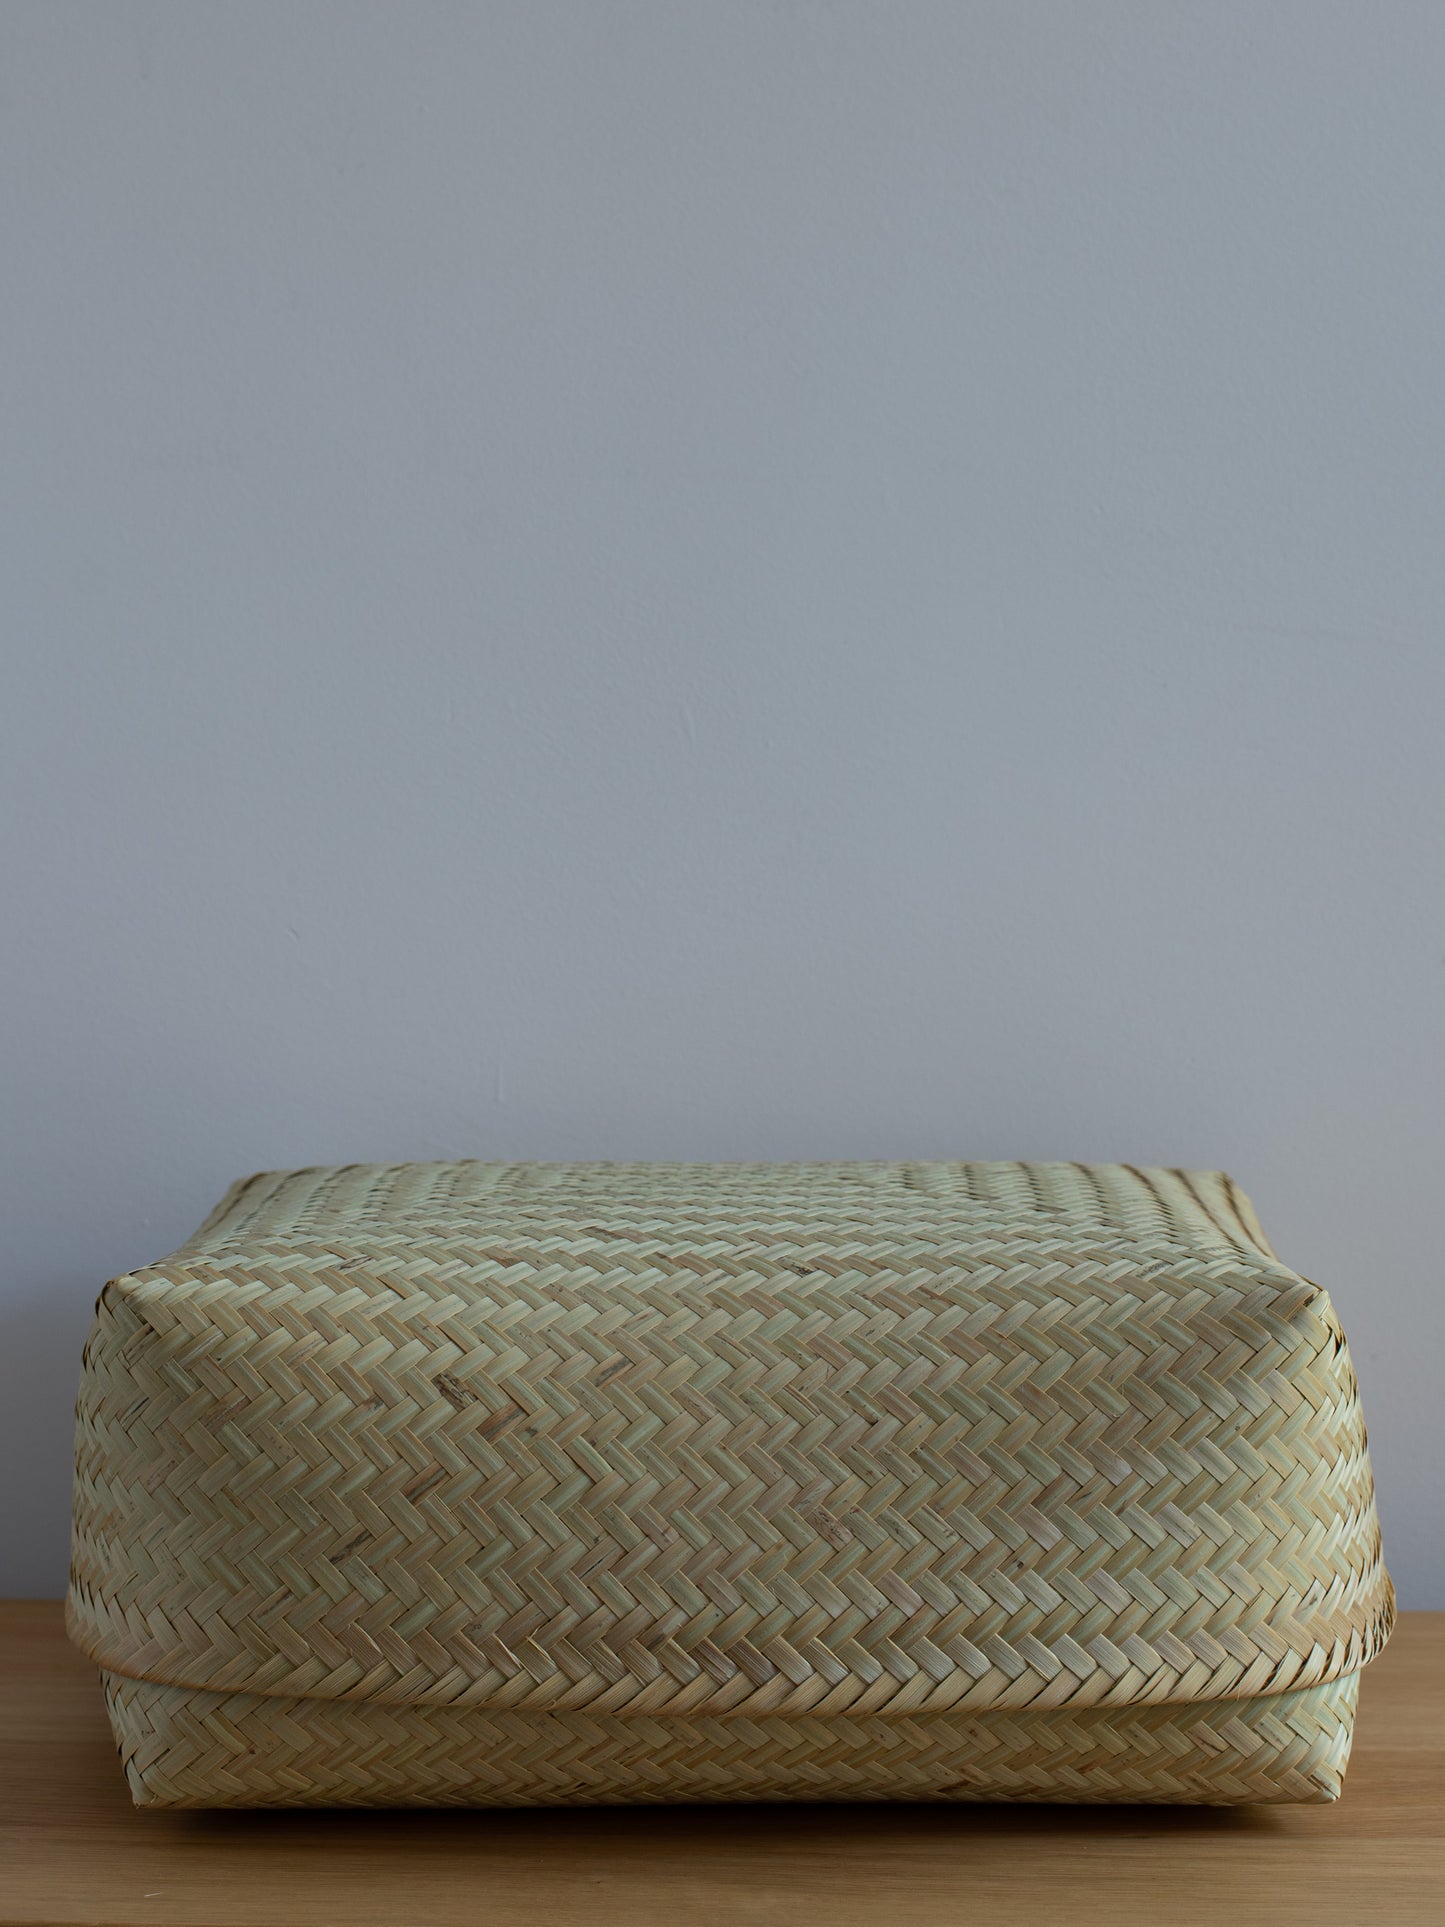 Bamboo Woven Storage Basket with Lid - X-Large